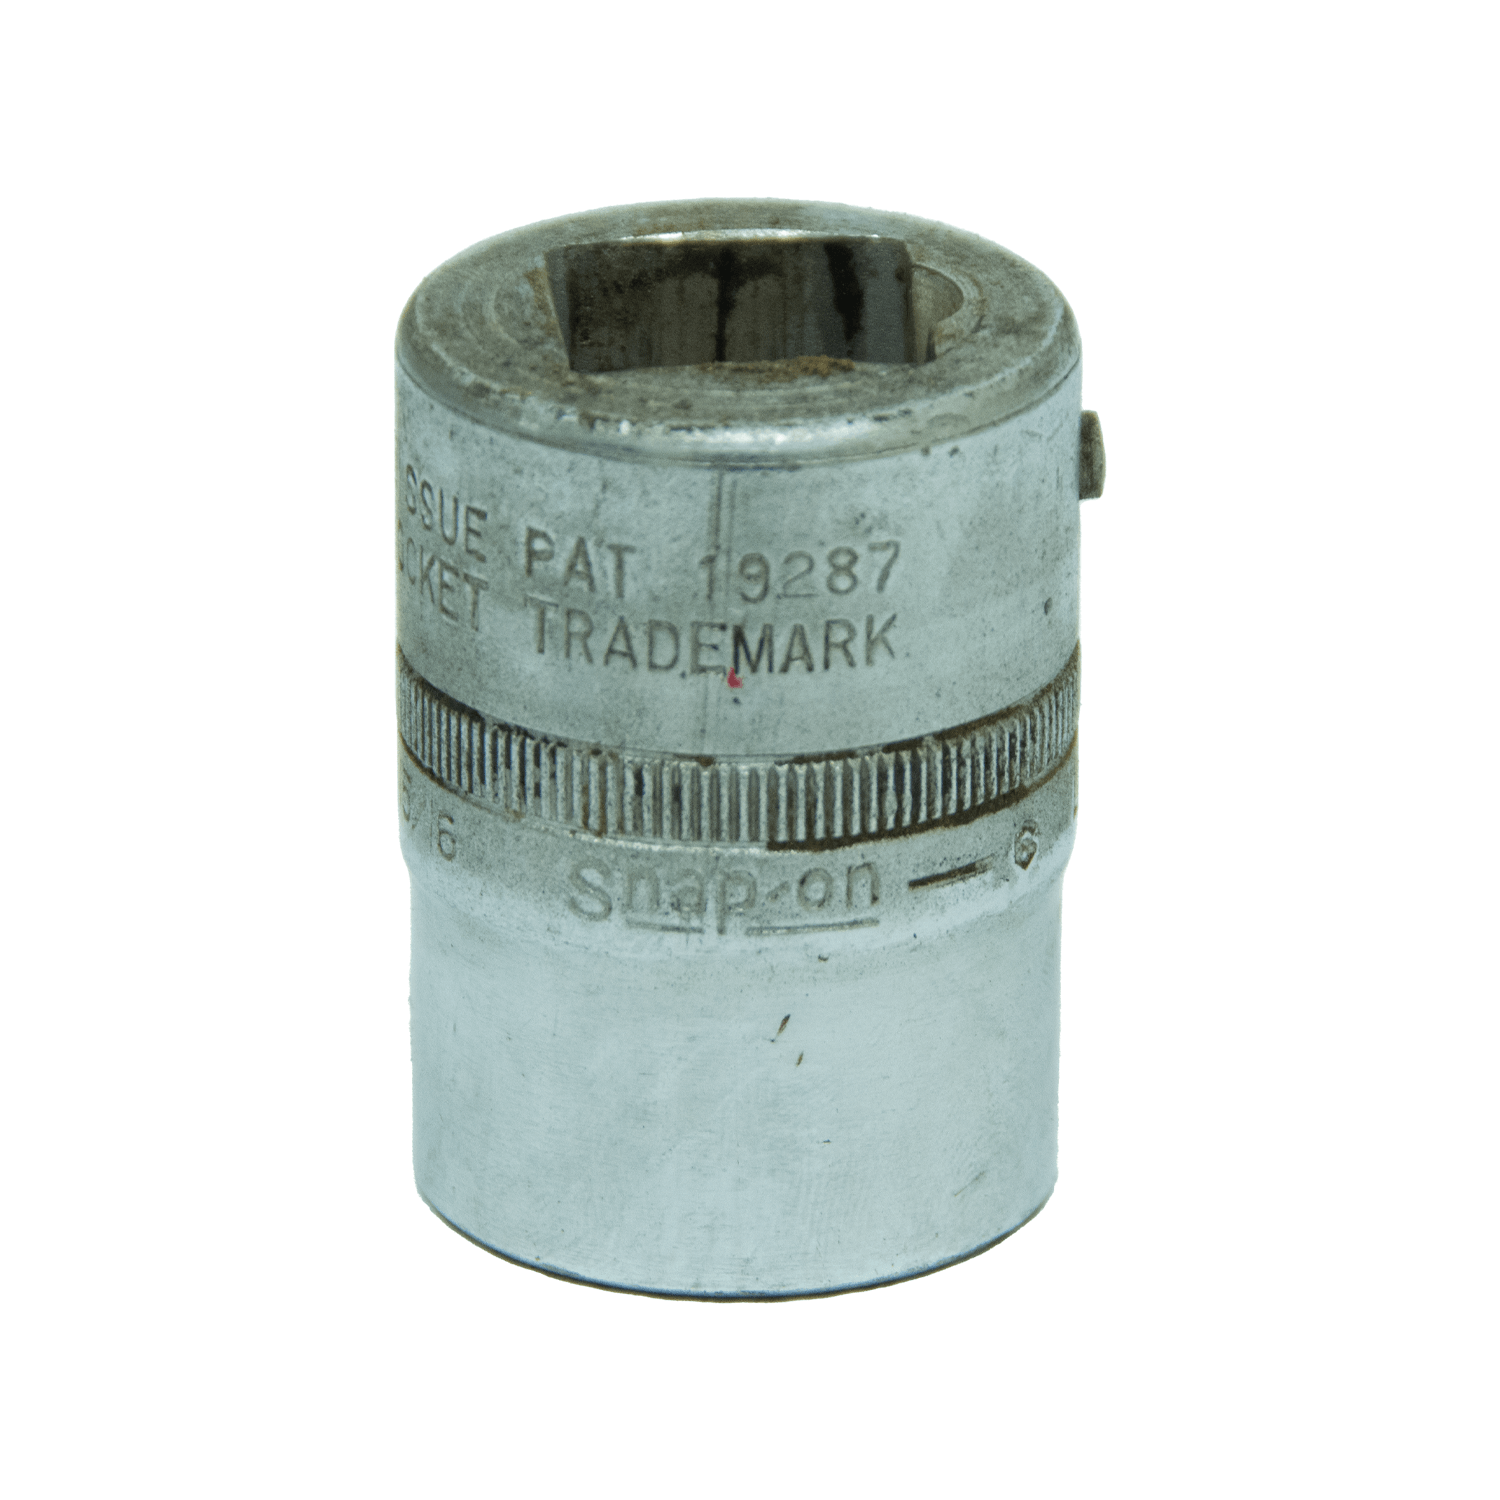 Snap-on LDH302 Drive 15/16